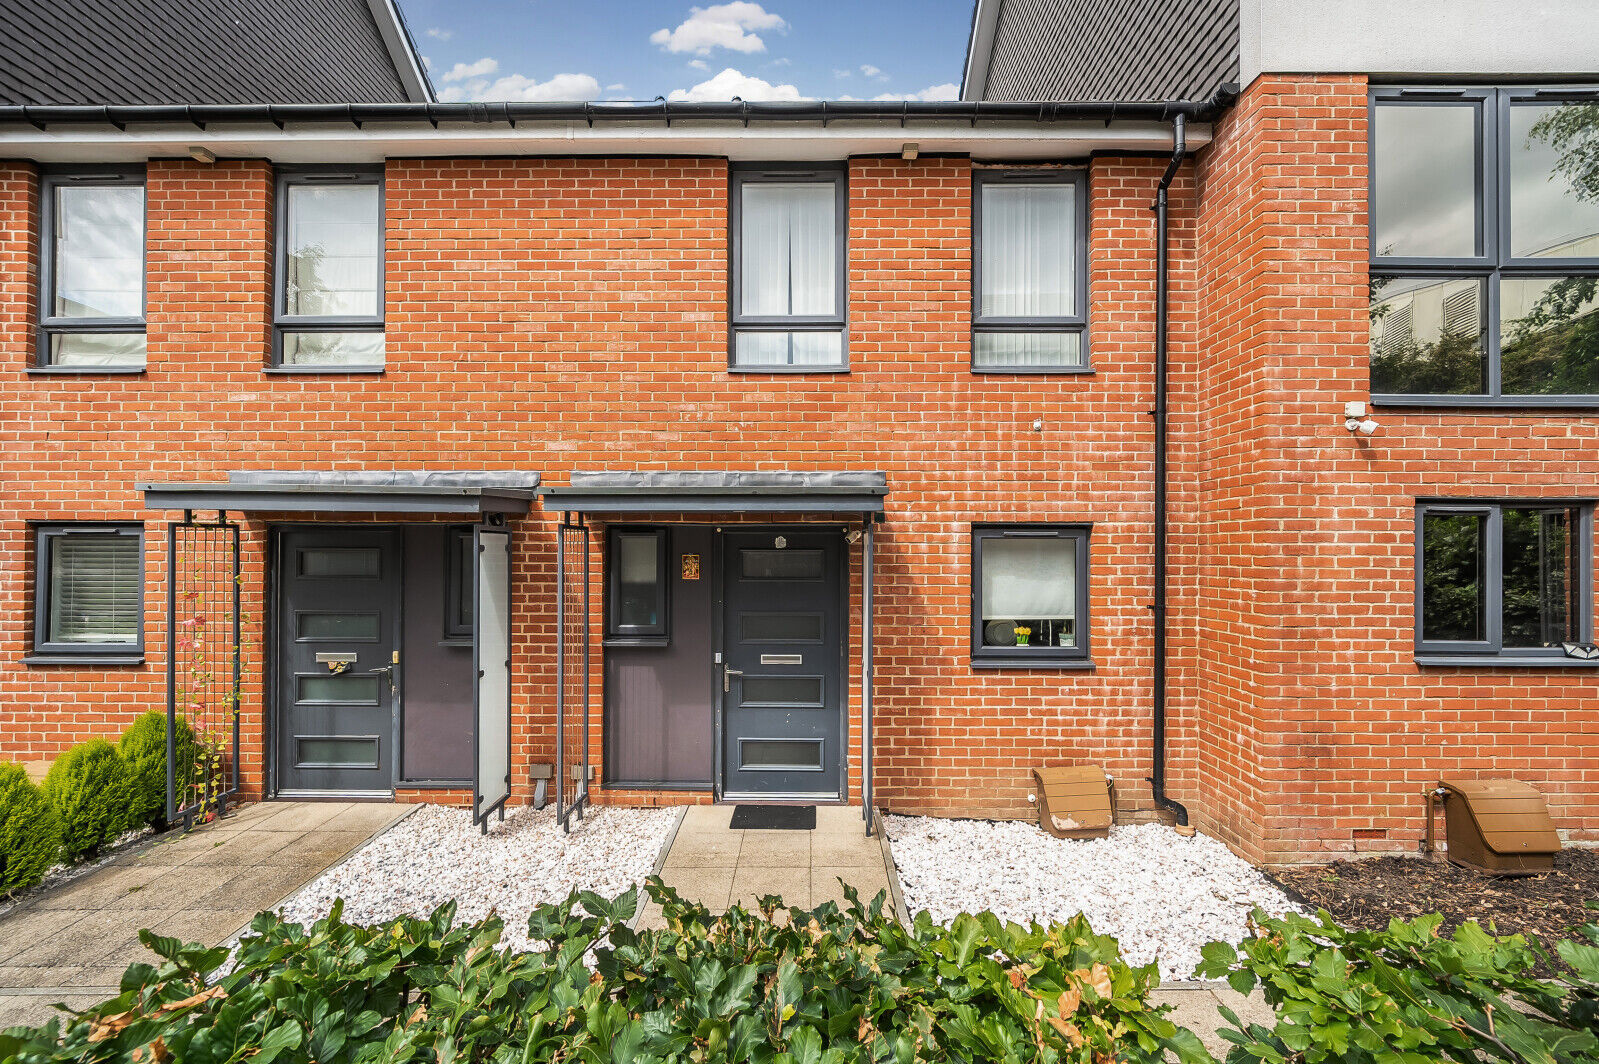 3 bedroom mid terraced house for sale Woolhampton Way, Reading, RG2, main image